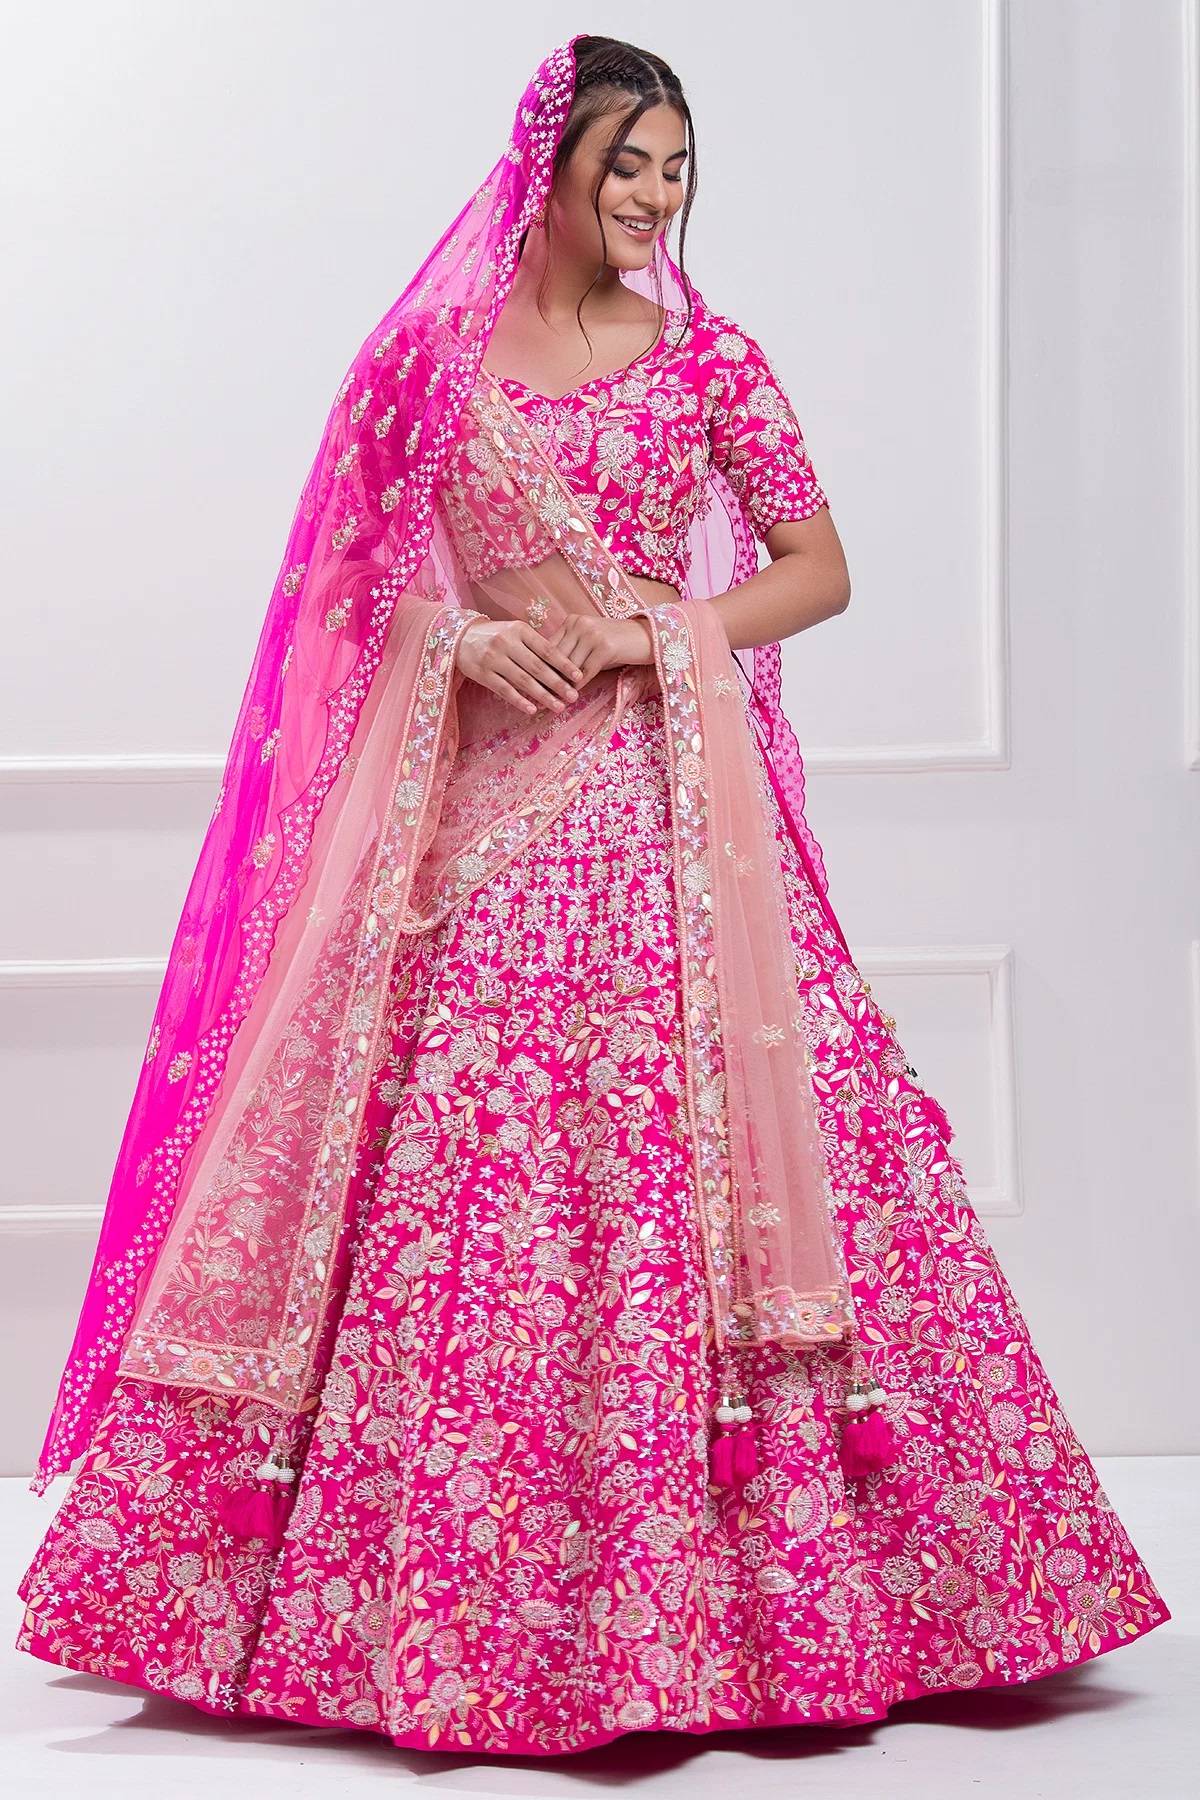 Dazzle on your big day with our breathtaking Hot Pink Sequins Embroidered Raw Silk Bridal Lehenga! 💖 Embrace the elegance of tradition fused with modern glamour. This exquisite piece is designed to make you feel like royalty as you dance into your forever.